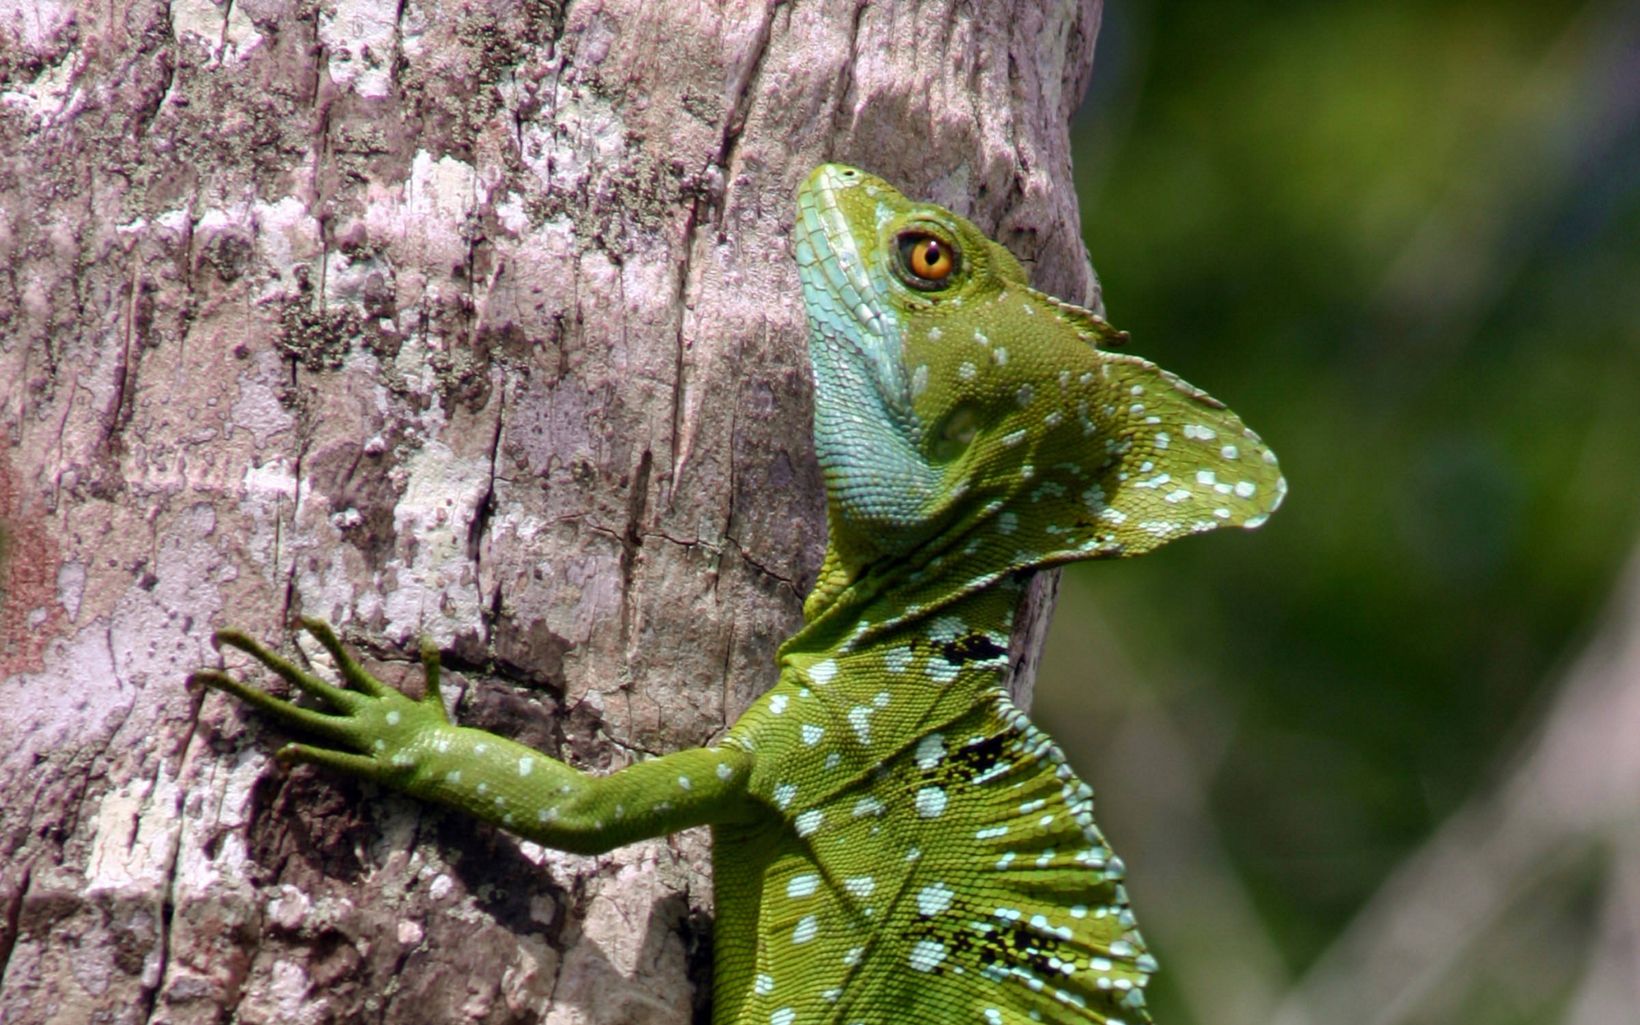 A polka dotted, green basilisk lizard clings to a tree trunk in the Rio San Juan area of Nicaragua.  